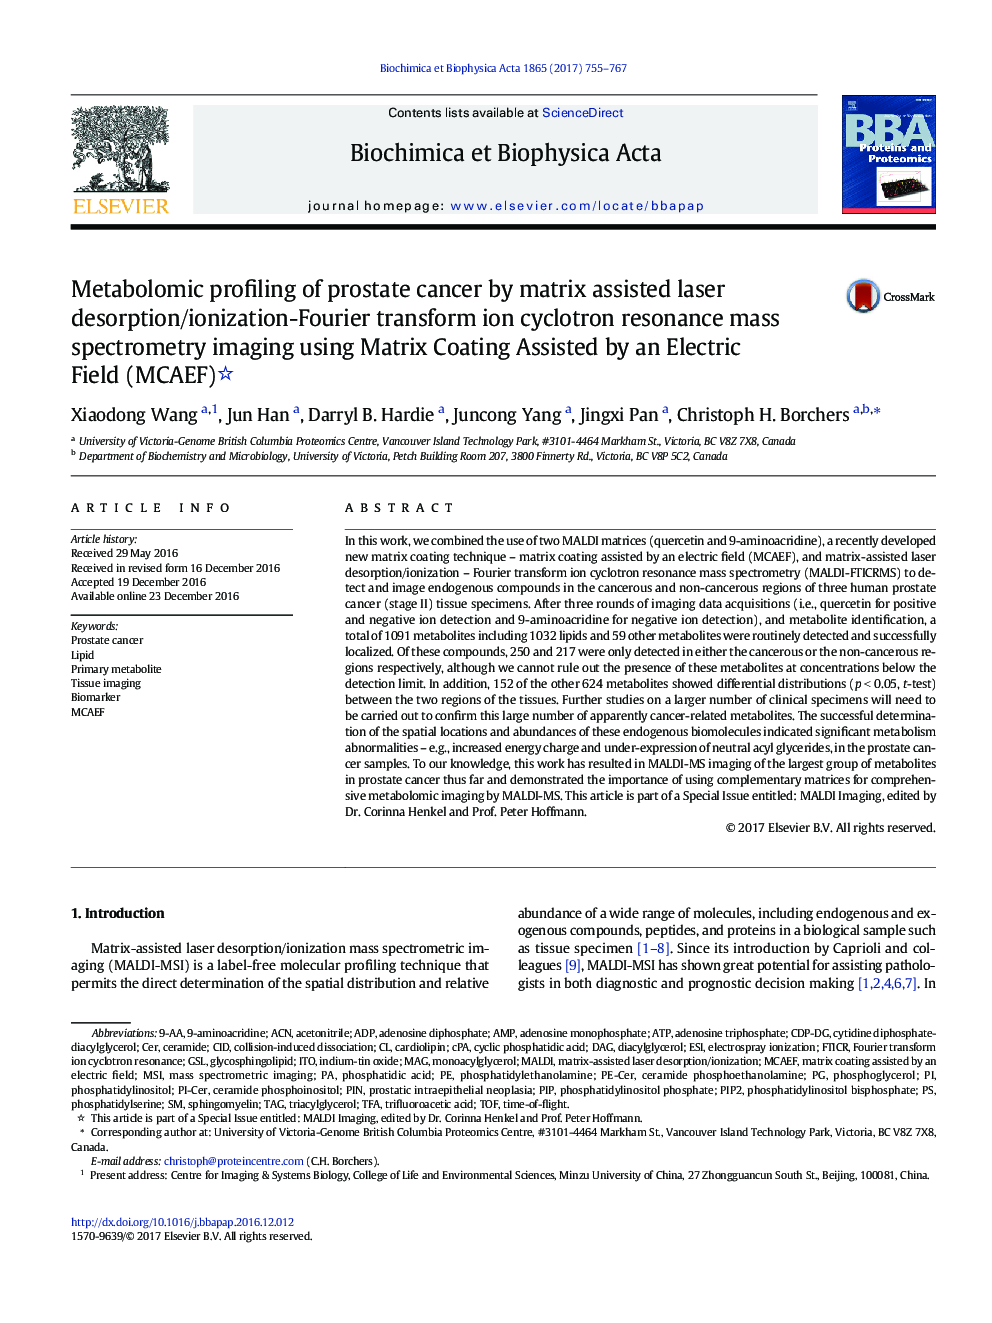 Metabolomic profiling of prostate cancer by matrix assisted laser desorption/ionization-Fourier transform ion cyclotron resonance mass spectrometry imaging using Matrix Coating Assisted by an Electric Field (MCAEF)